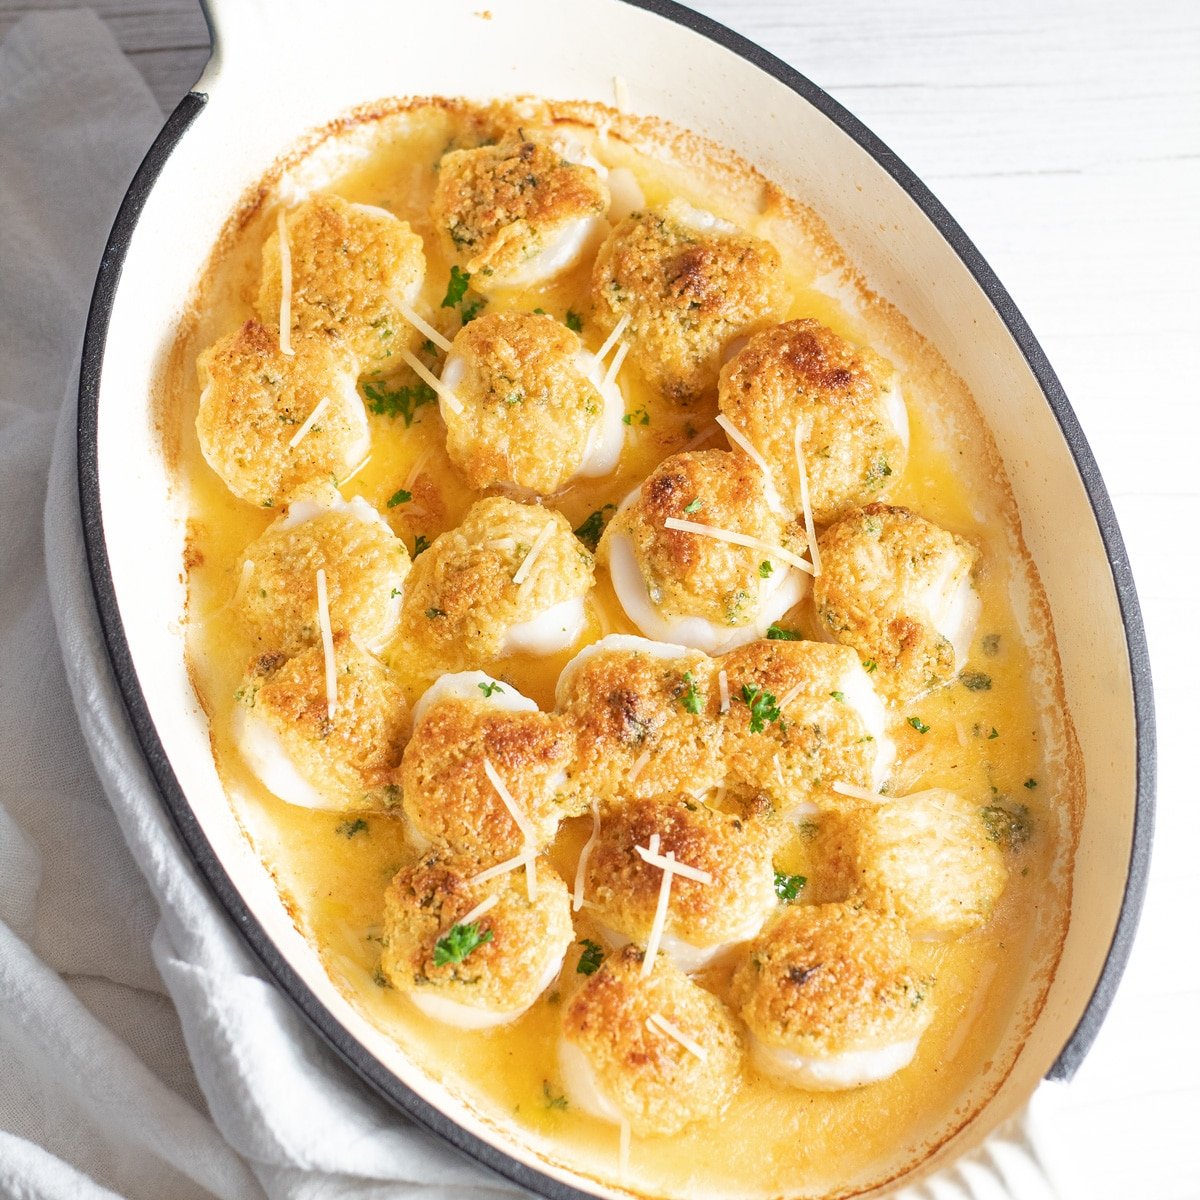 Best baked scallops topped with crumb topping in enamel coated cast iron baking dish.